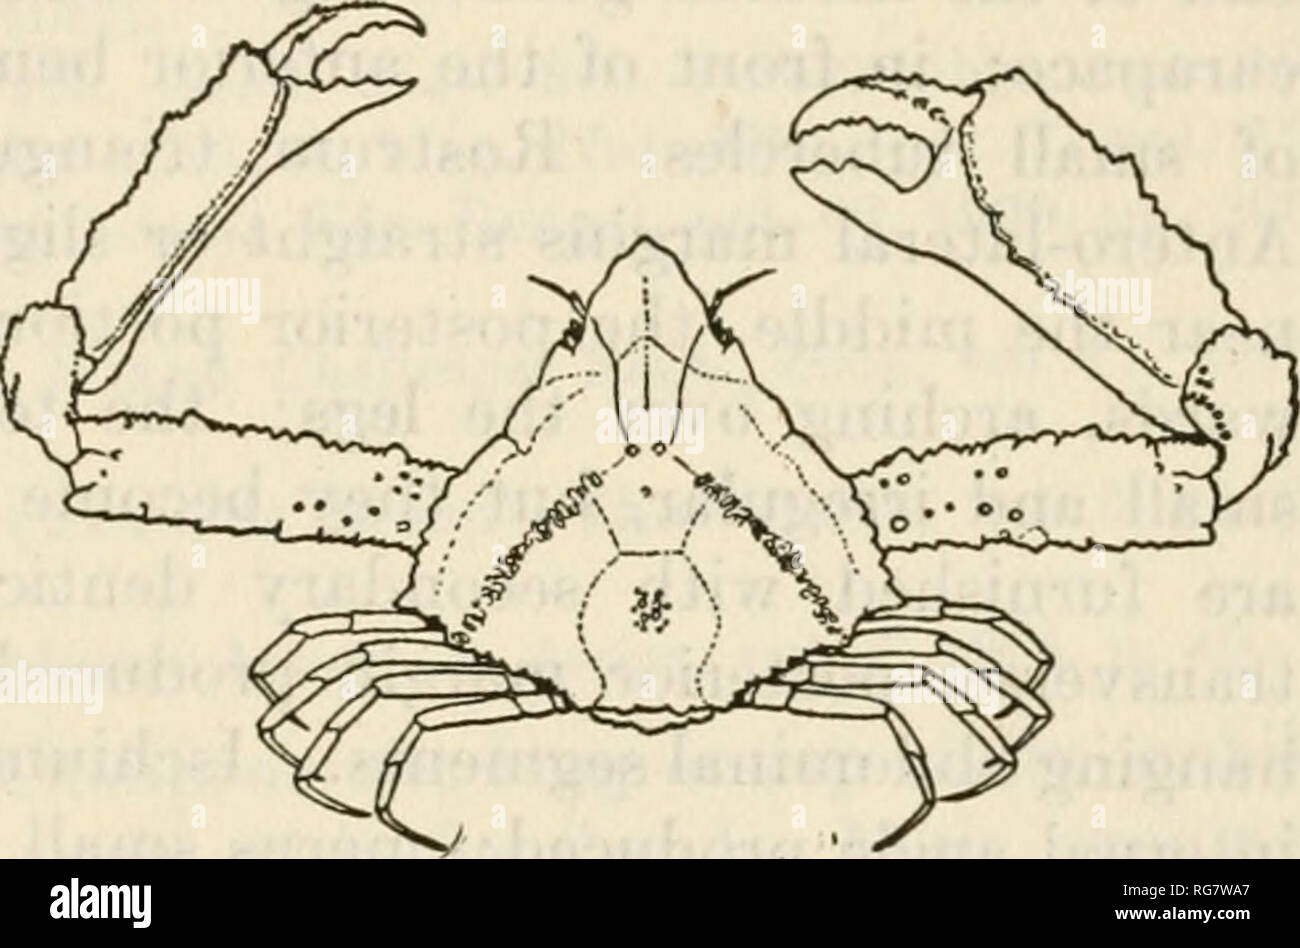 . Bulletin - United States National Museum. Science. THE SPIDER CRABS OF AMERICA 559 Measurements.—Male (21973), length of carapace 14.2, width of same 18.2, length of cheliped 37.6 mm. Range.—From Magdalena Bay, Lower California, Mexico, to Panama. Depth, 12 to 51 fathoms. Material examined.—See table, page 557. HETEROCRYPTA LAPIDEA Rathbun Heterocrypta lapidea Rathbun. Bull. U. S. Fish Comm., vol. 20, for 1900, pt. 2 (1901), p. 83, text-fig. 13 (type-locality, St. Thomas; holotype, Cat. No. 20324, U.S.N.M.). Dm^nosis.—Carapace one and one-eighth times as wide as long, margins dentate or loba Stock Photo